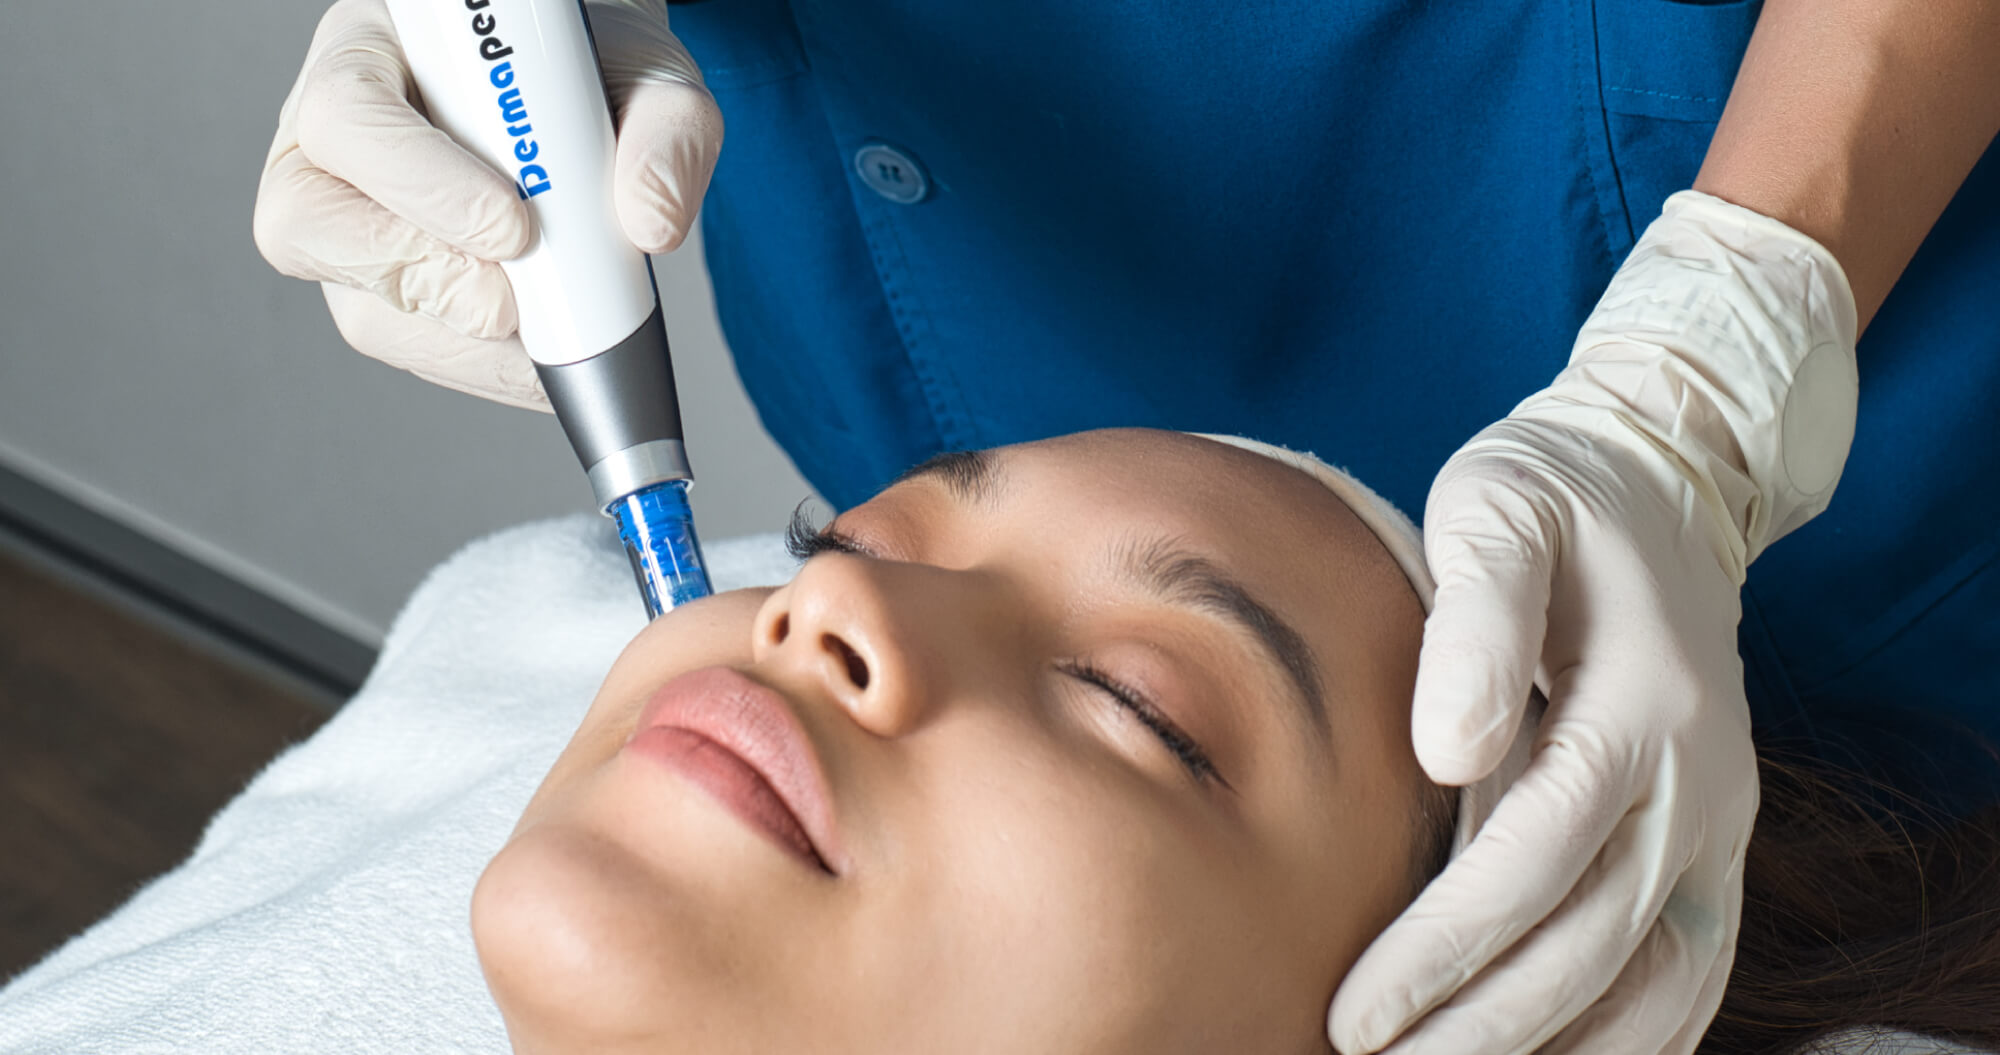 An aesthetician performing facial treatment on a patient, using Dermapen 4.